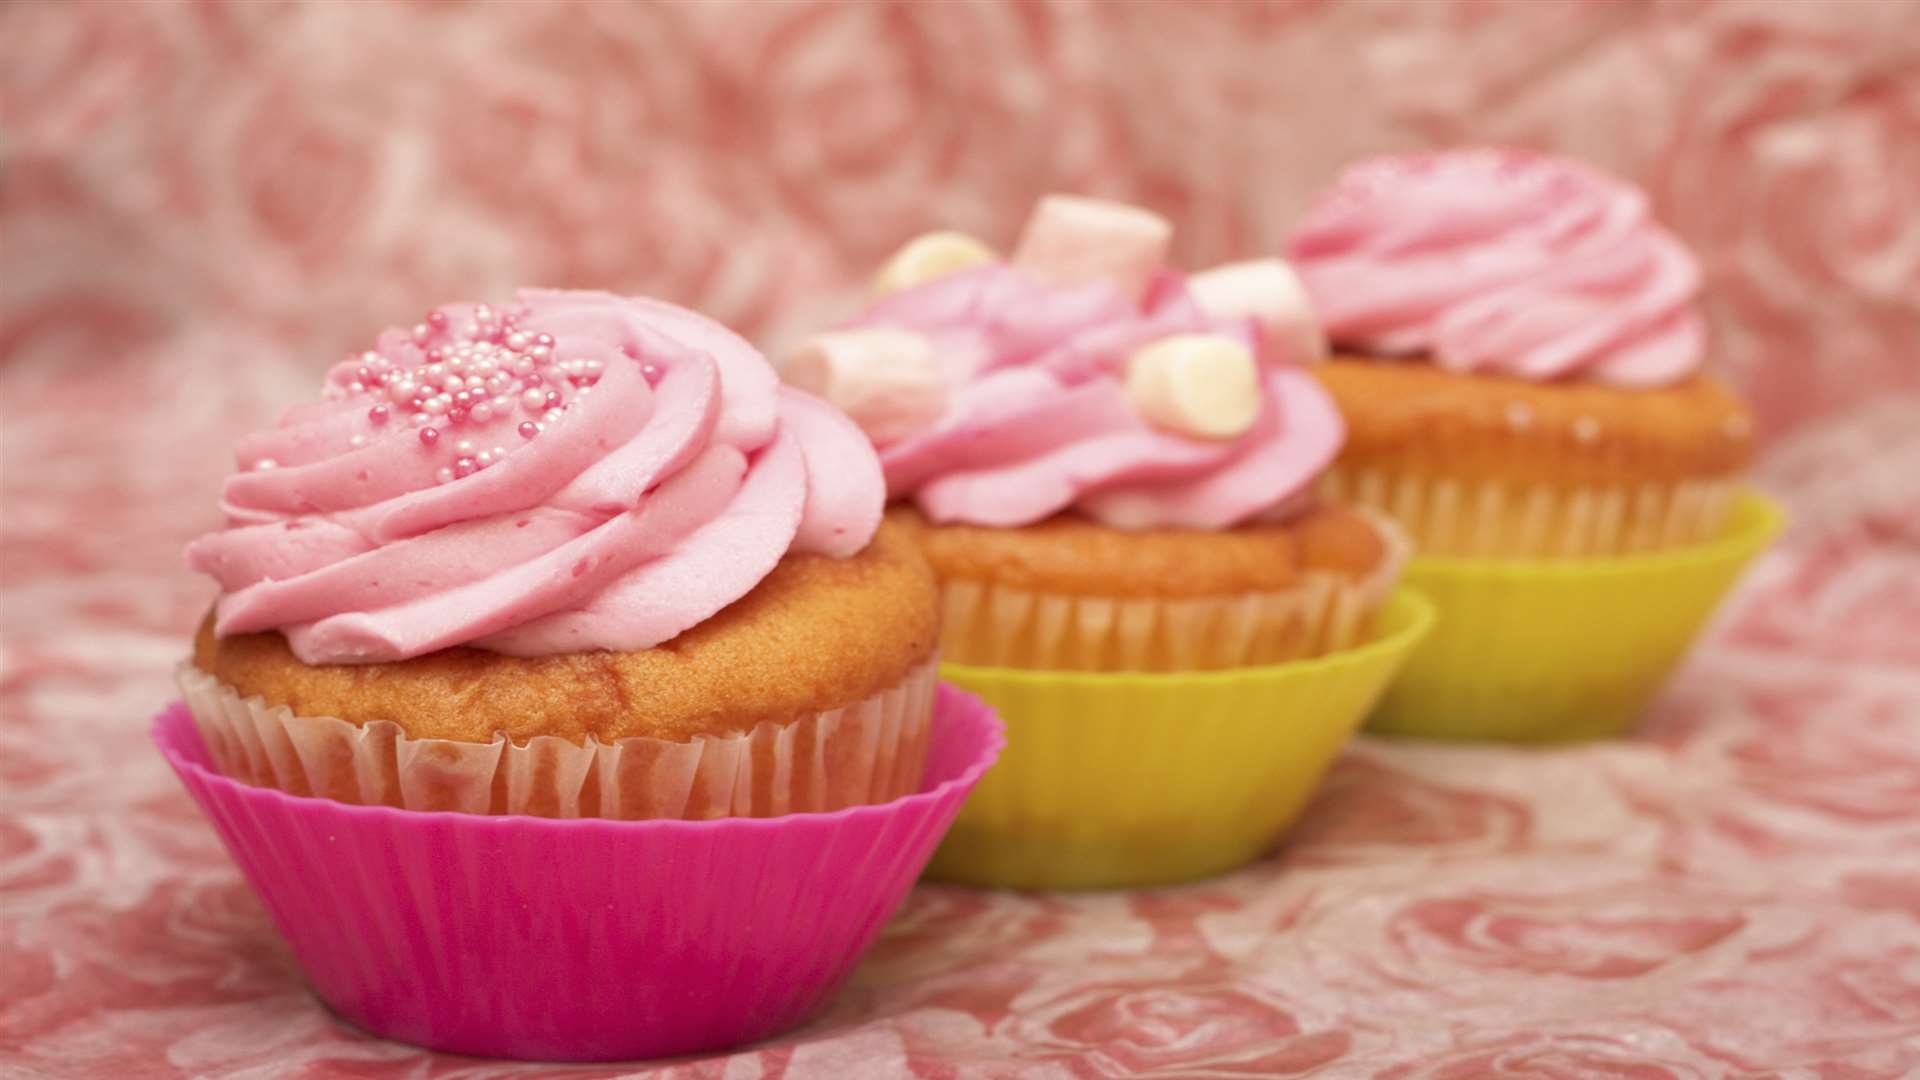 Cupcake decorating is among the birthday activities you could do from home